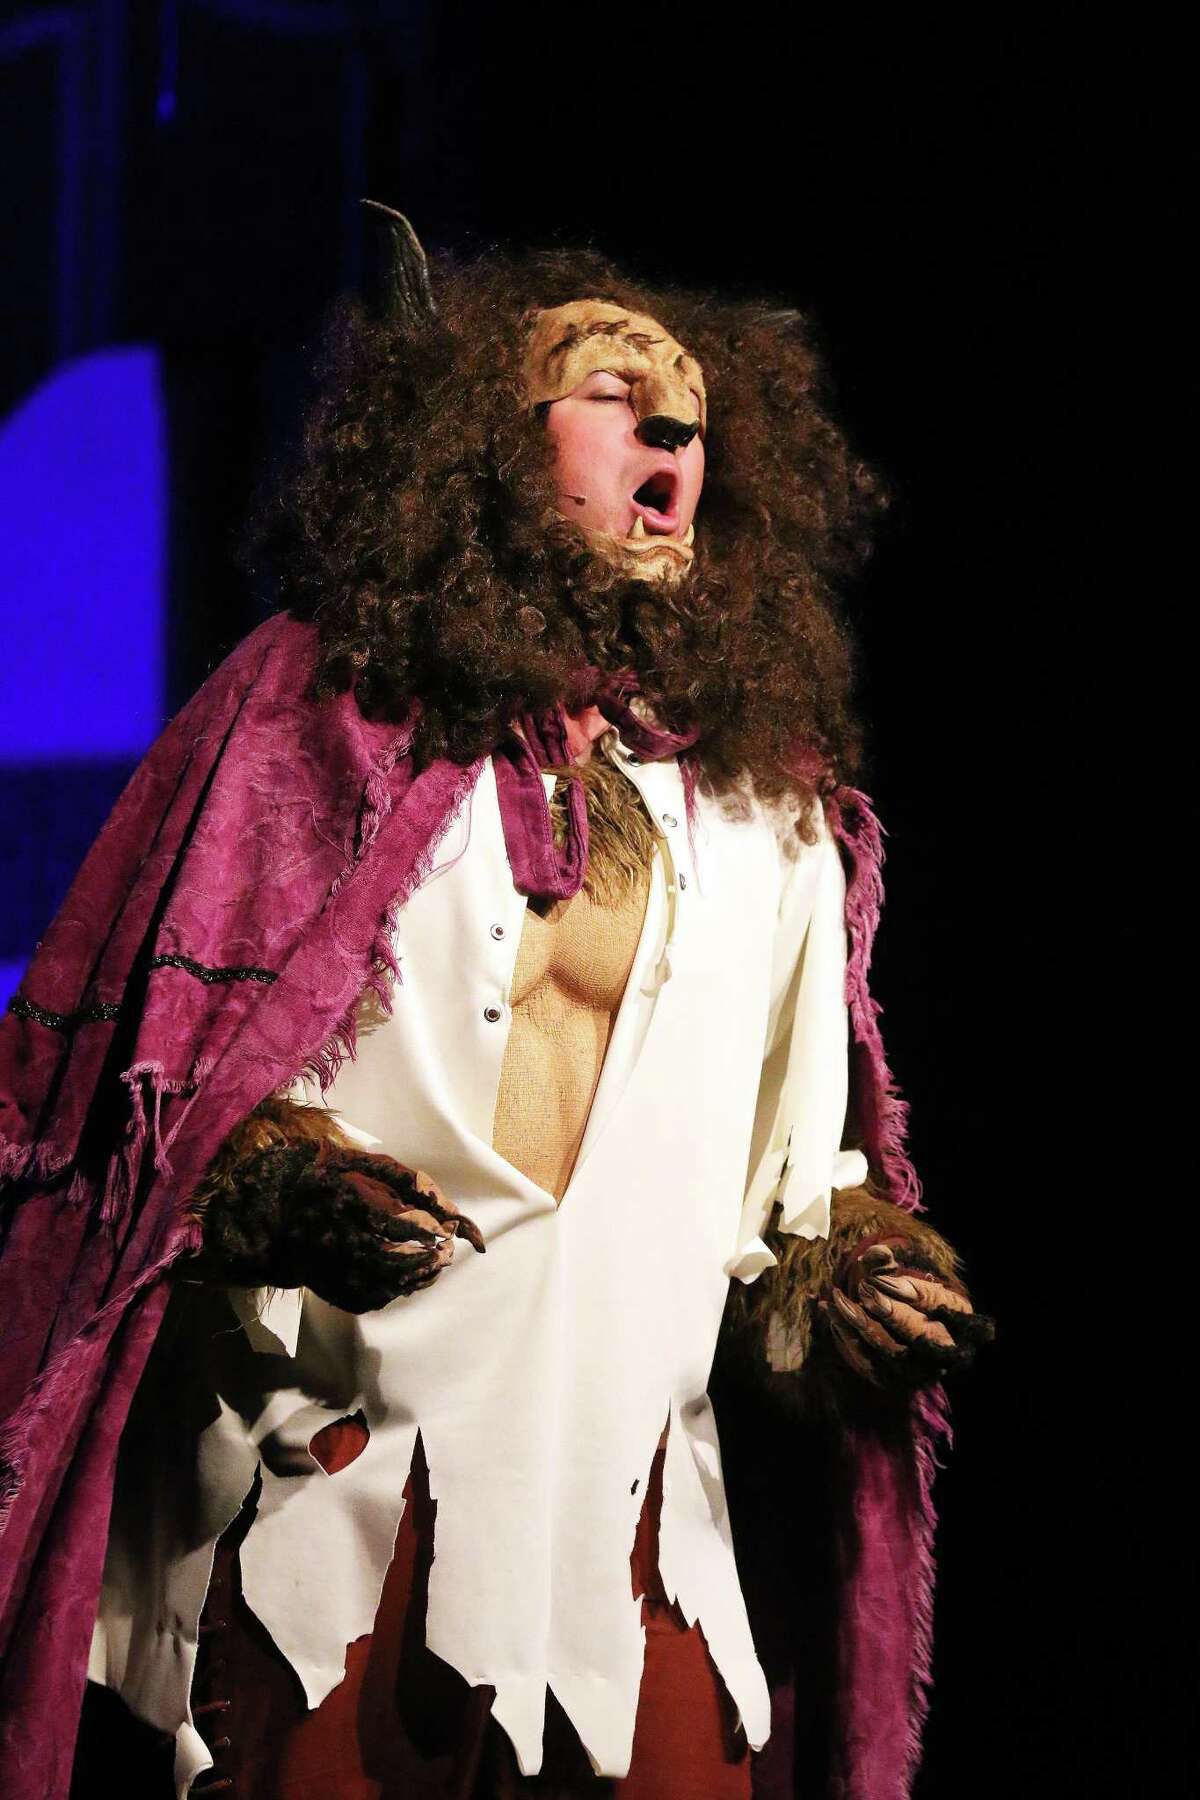 Kris Rhine, the Beast, sings a soliloquy in the first half of the show Beauty and the Beast at Humphreys-Burson Theatre in Liberty, Texas on Friday, June 22.